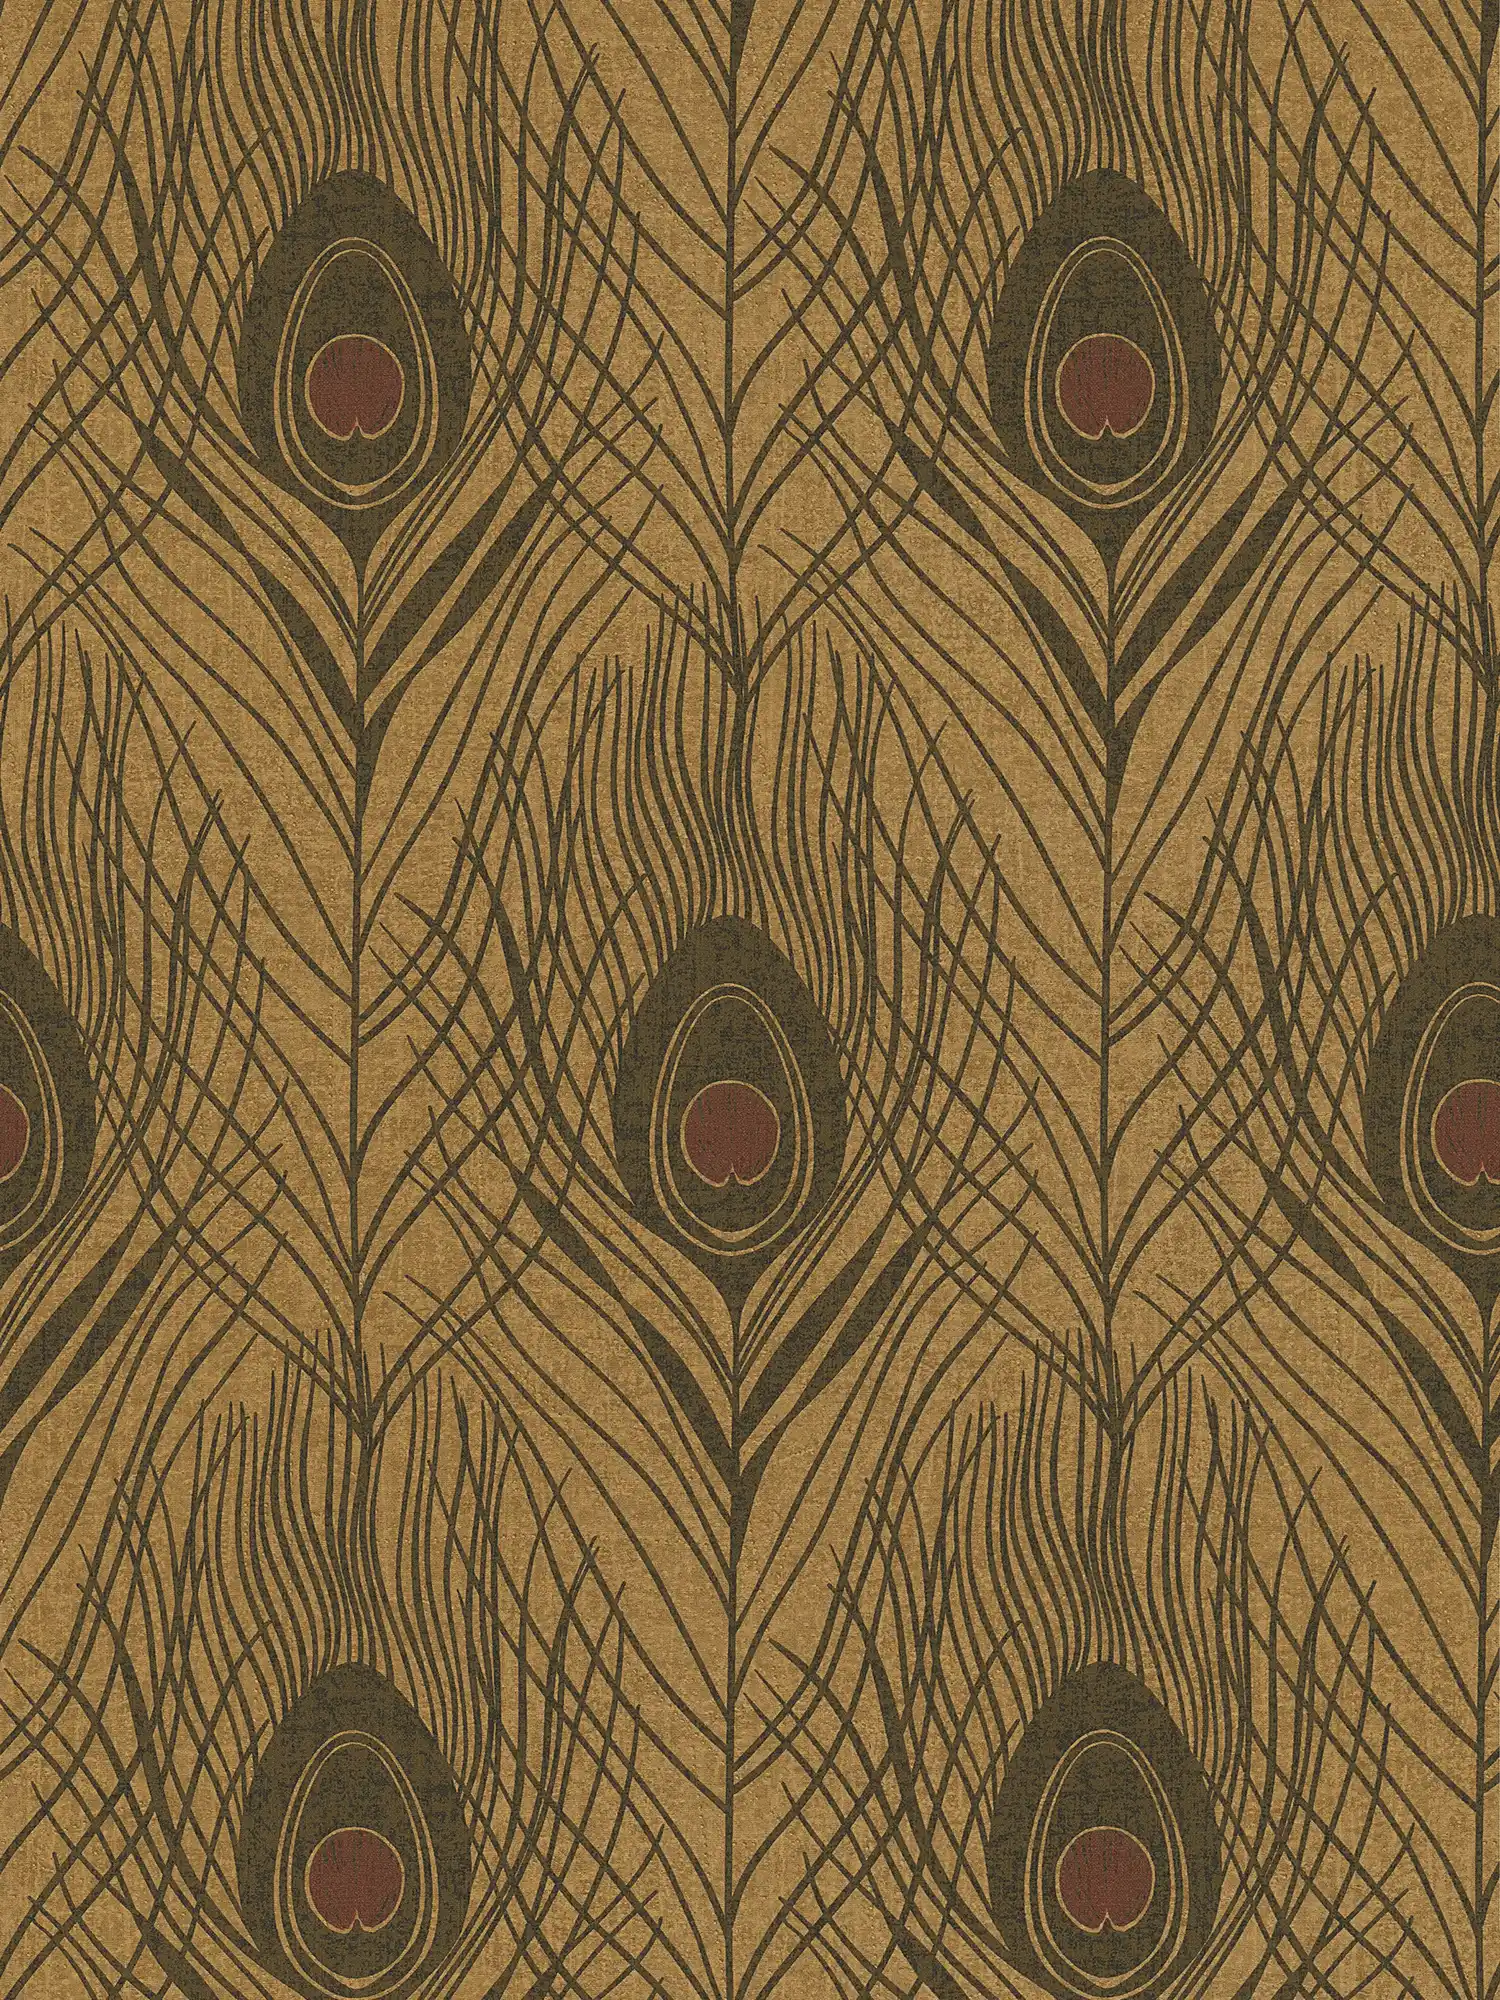 Golden non-woven wallpaper with peacock feathers - black, gold, brown
